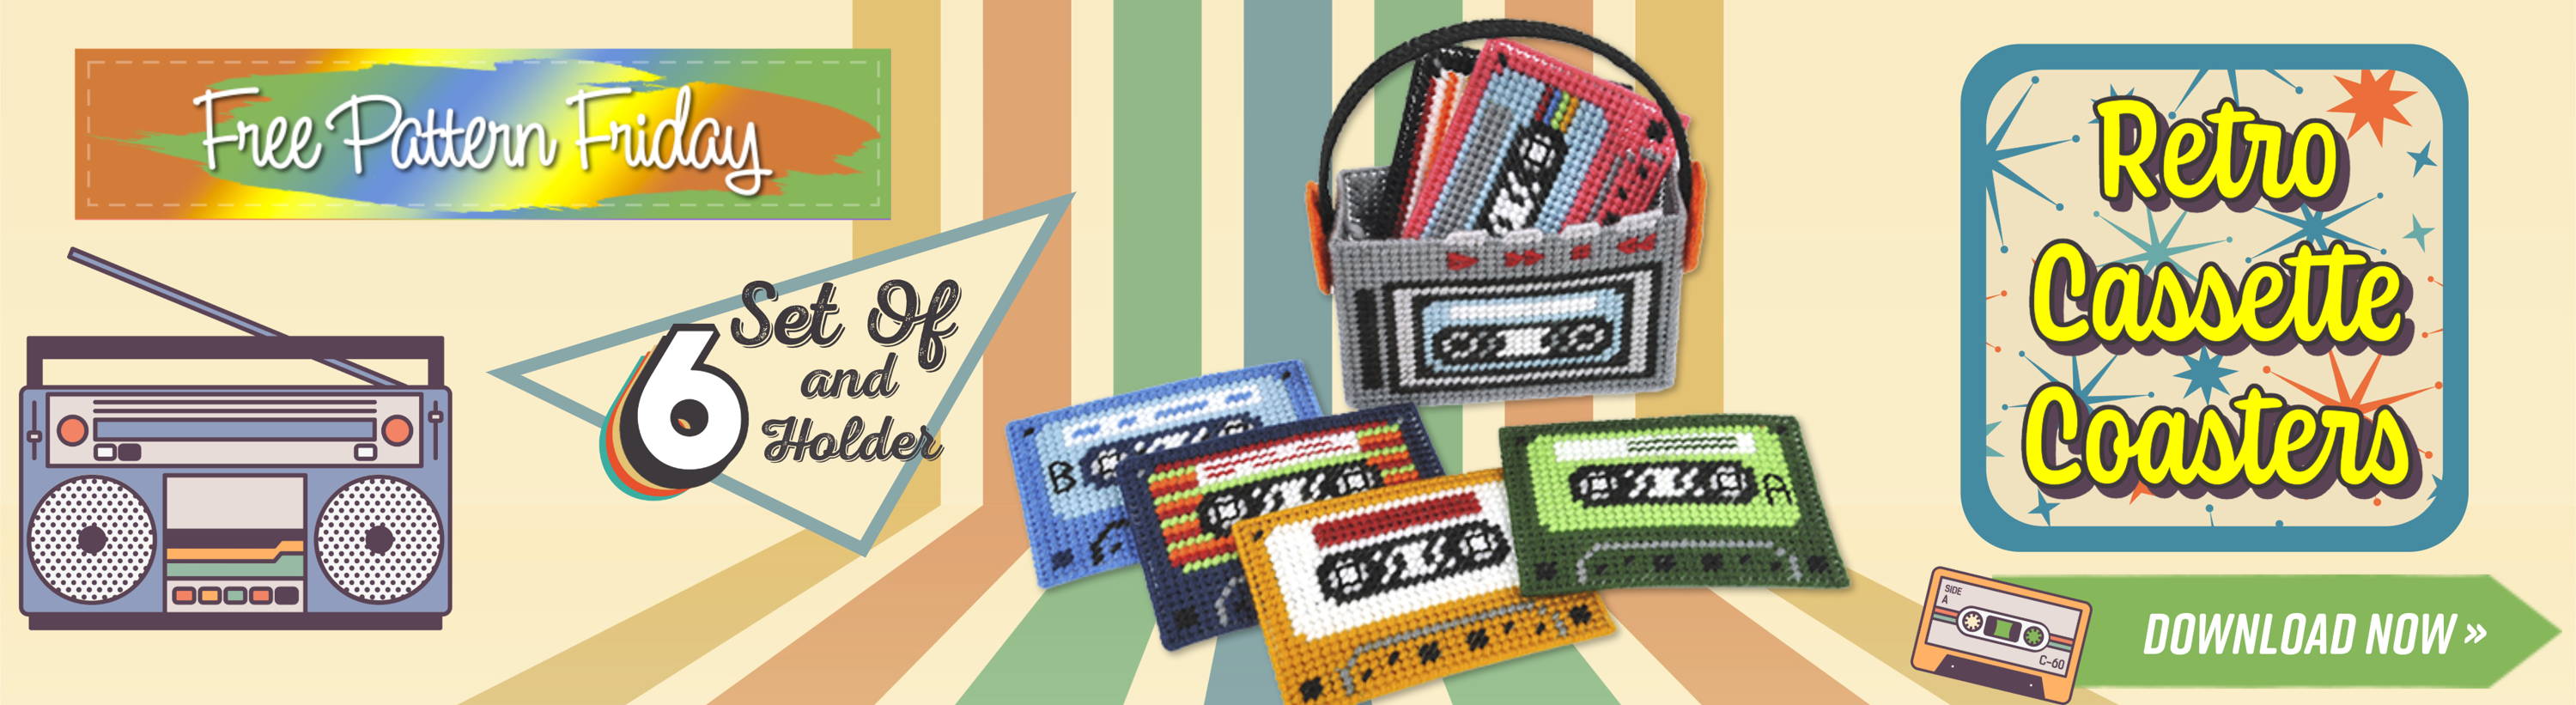 Free Pattern Friday! Retro Cassette Coasters. Download Now.